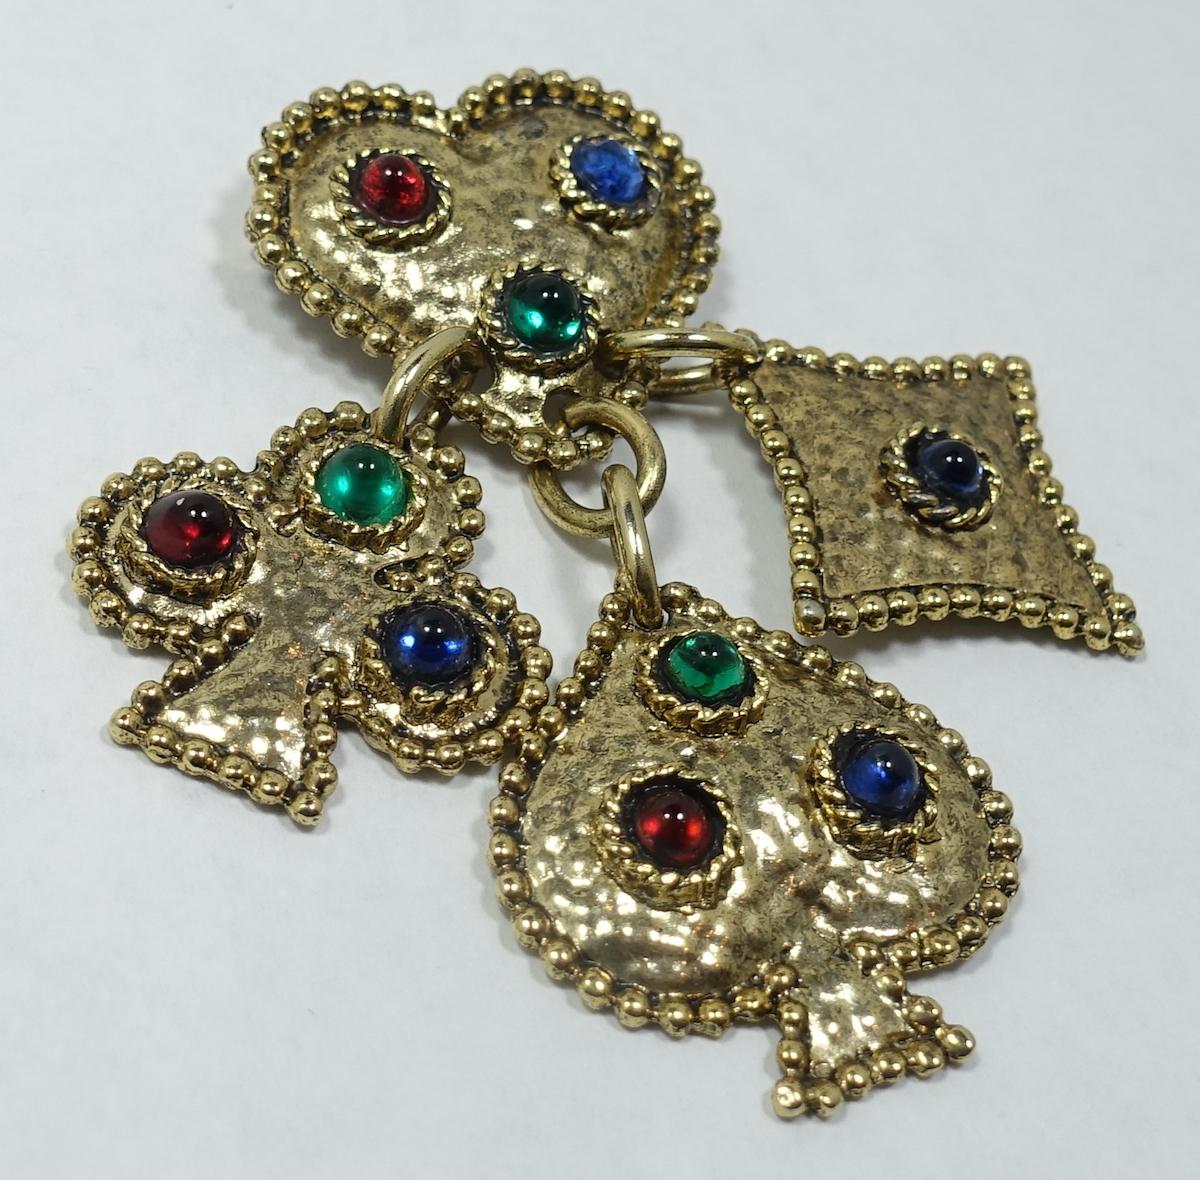 This large French vintage signed Edouard Rambaud brooch features a card theme with hearts, spade, club, diamond symbols with red, blue and green Gripoix cabochon stones in a gold tone setting.  This brooch measures 3-1/2” x 2-1/2” approx and is